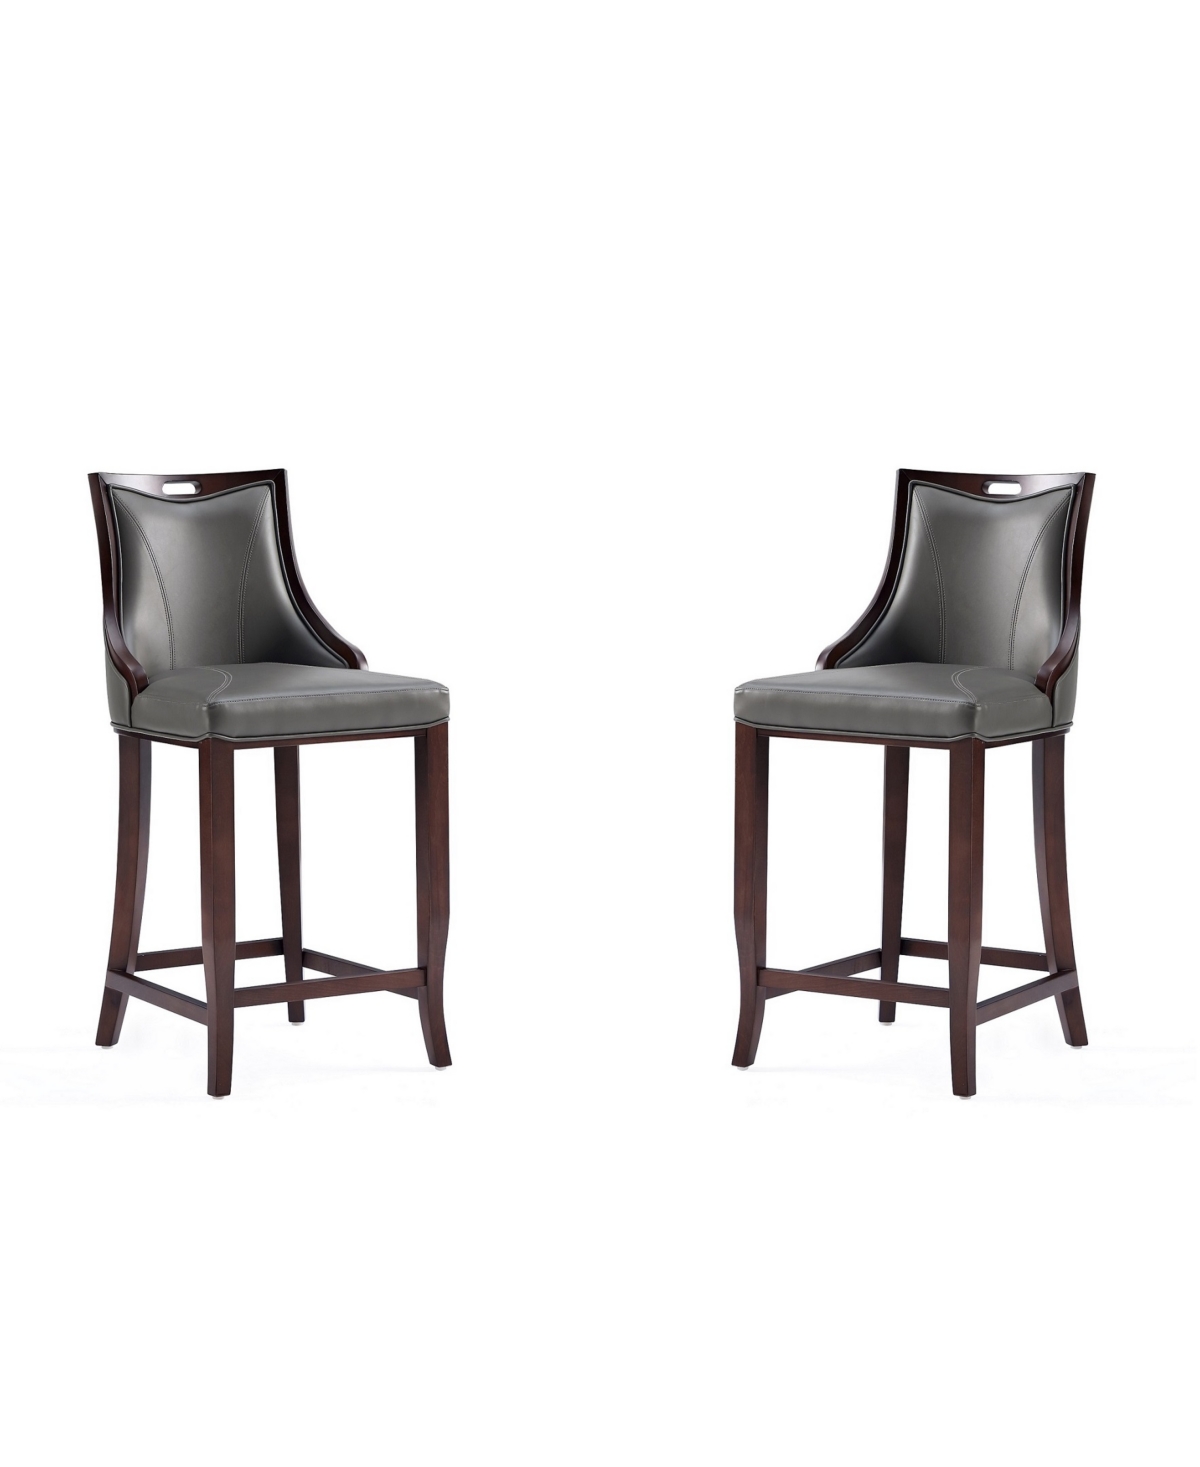 Manhattan Comfort Emperor 19" 2 Piece Beech Wood Faux Leather Upholstered Barstool Set In Pebble Gray